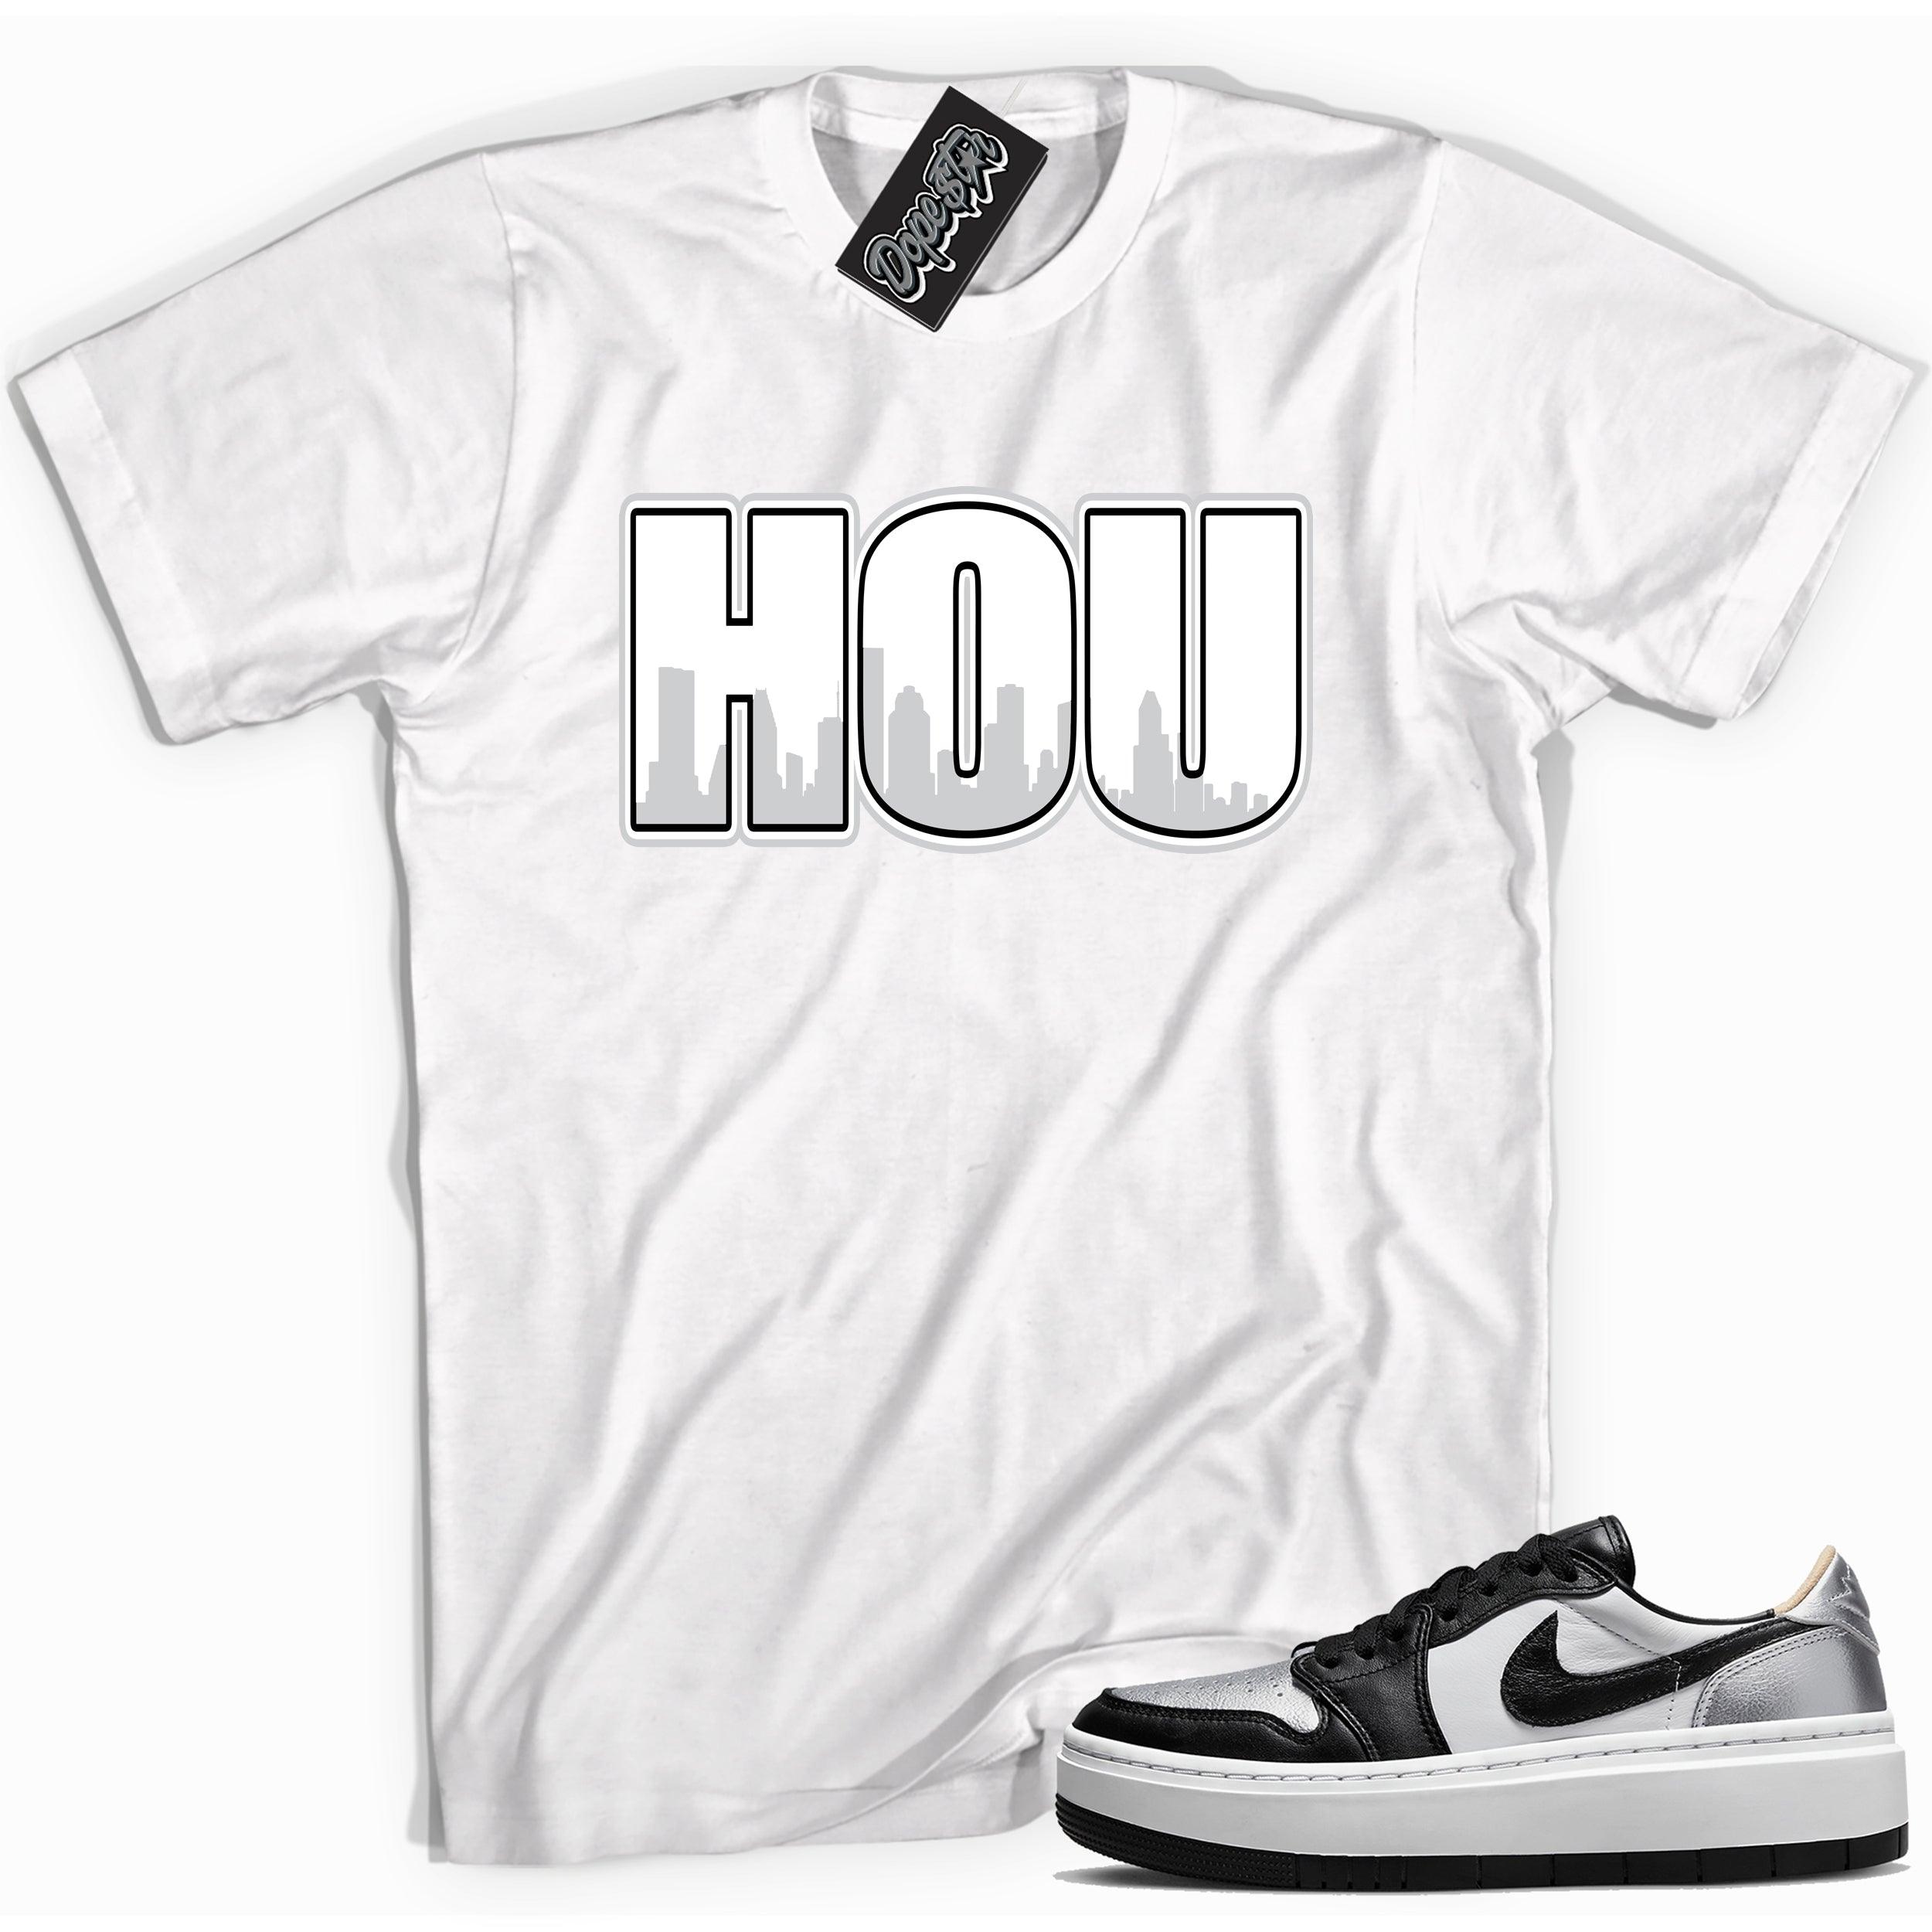 Cool white graphic tee with 'Houston HOU' print, that perfectly matches Air Jordan 1 Elevate Low SE Silver Toe sneakers.